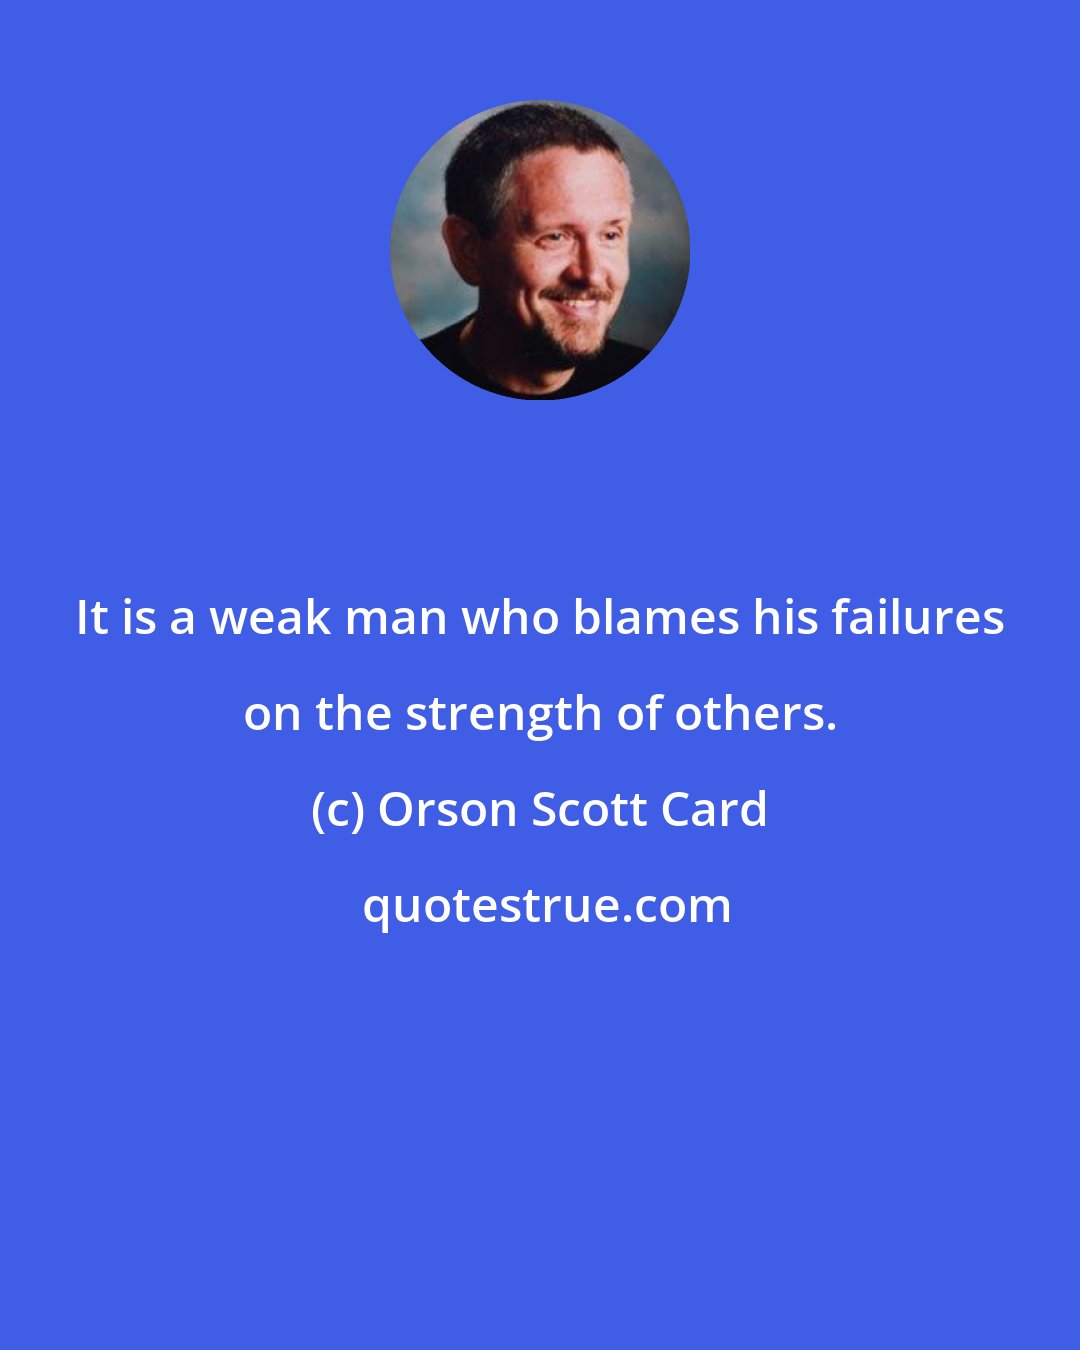 Orson Scott Card: It is a weak man who blames his failures on the strength of others.